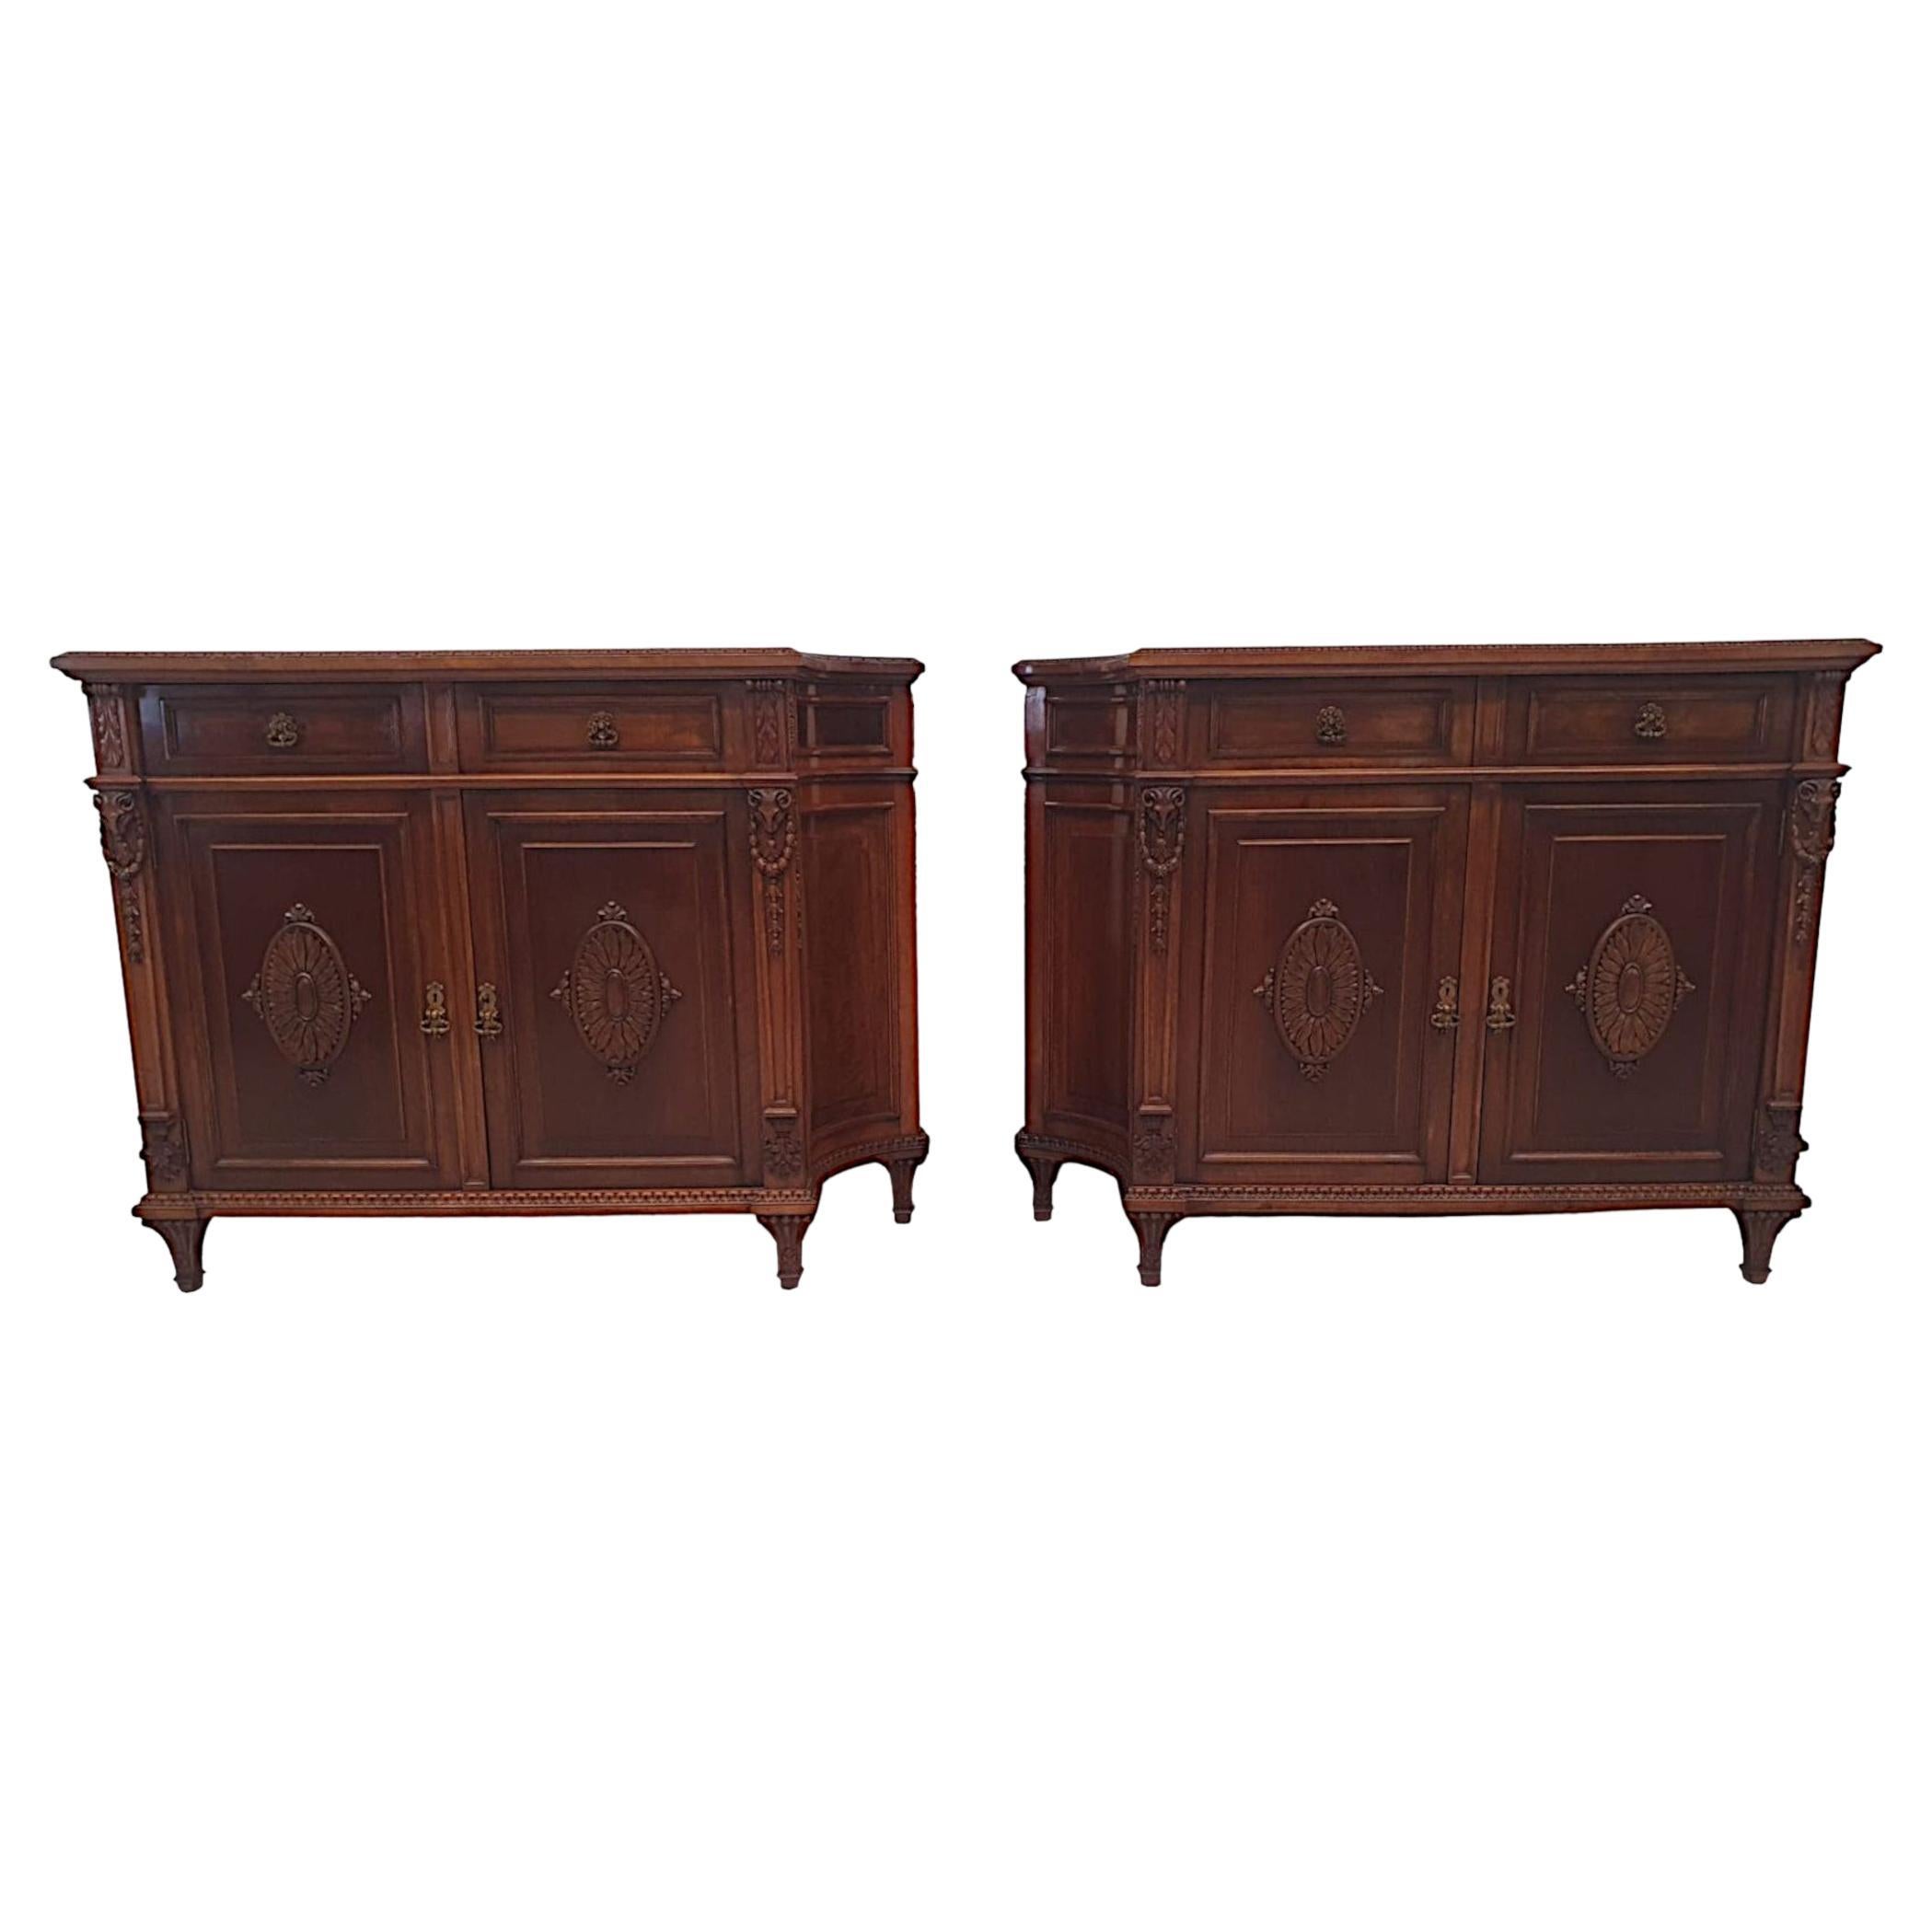 A Very Fine Pair of Mid 20th Century Side Cabinets